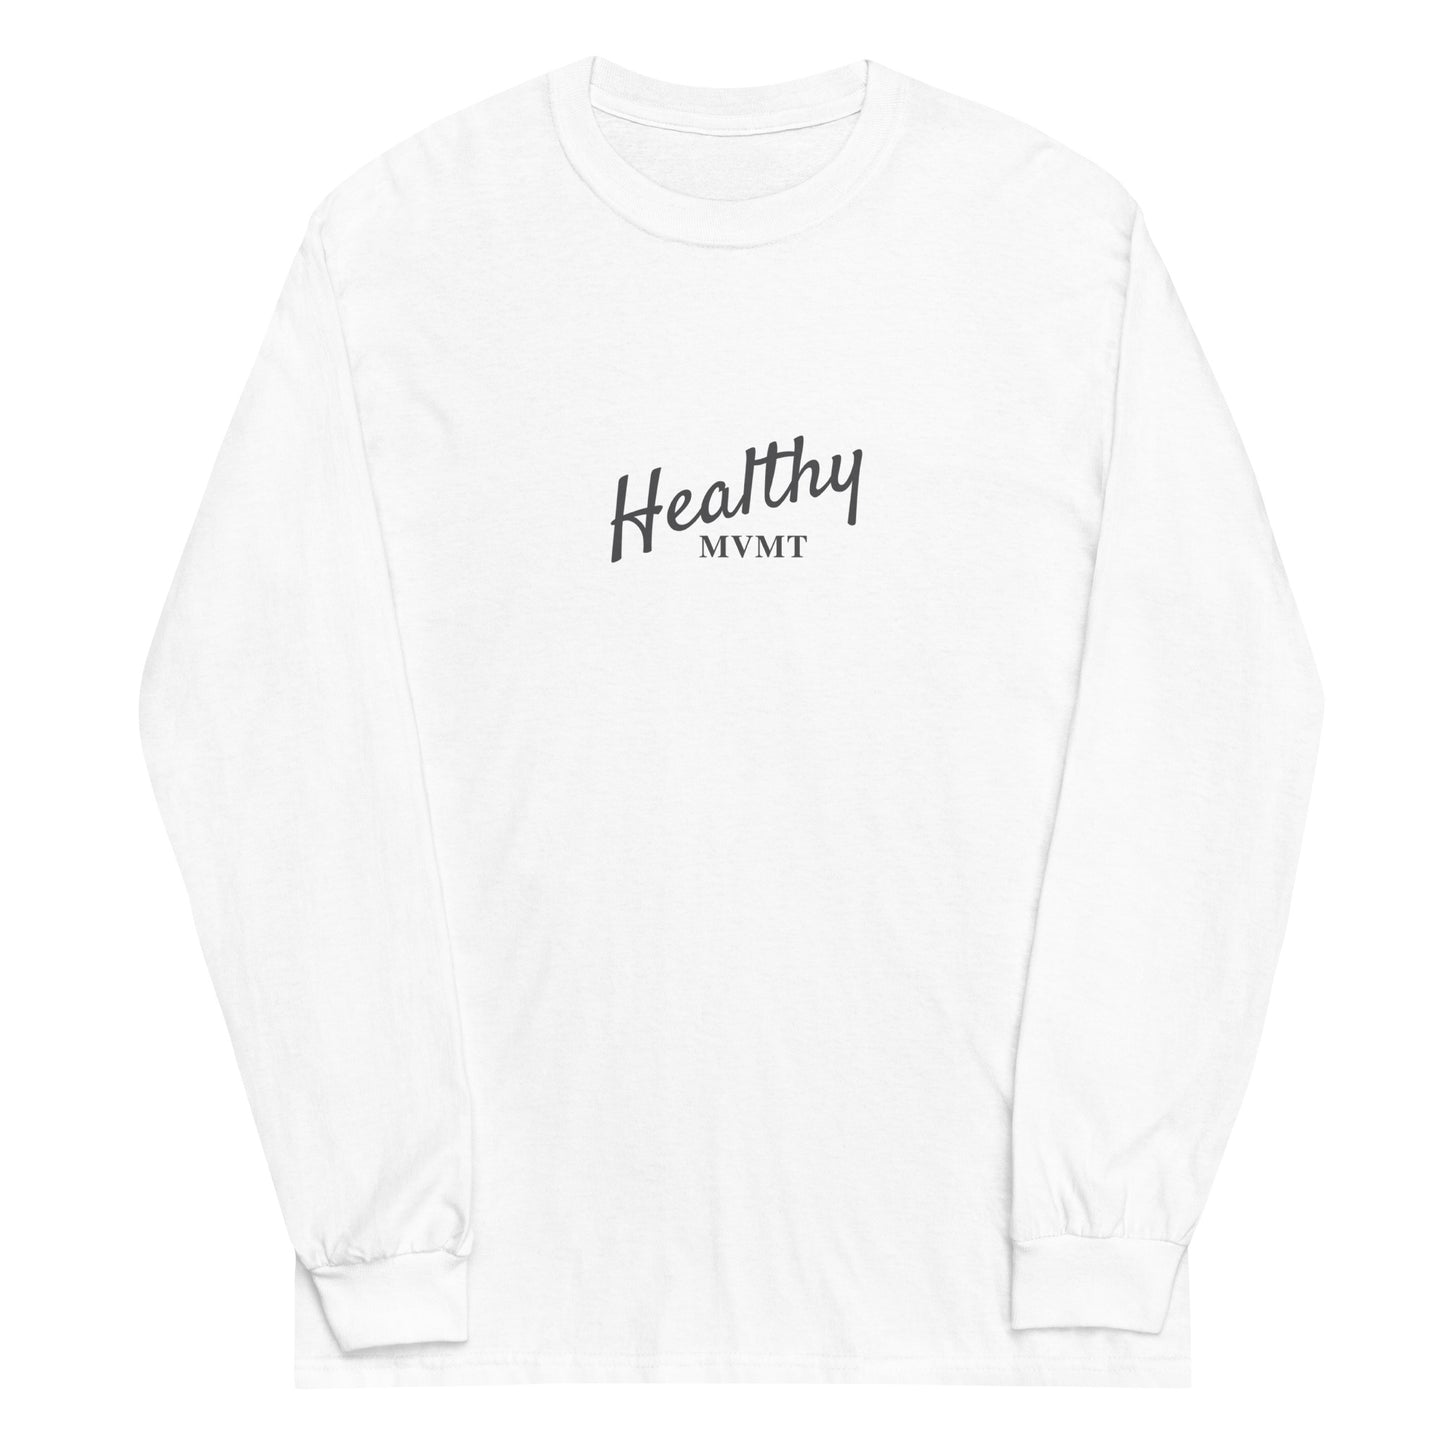 HealthyMVMT (White) | Men's Long Sleeve Tee by HealthyMVMT